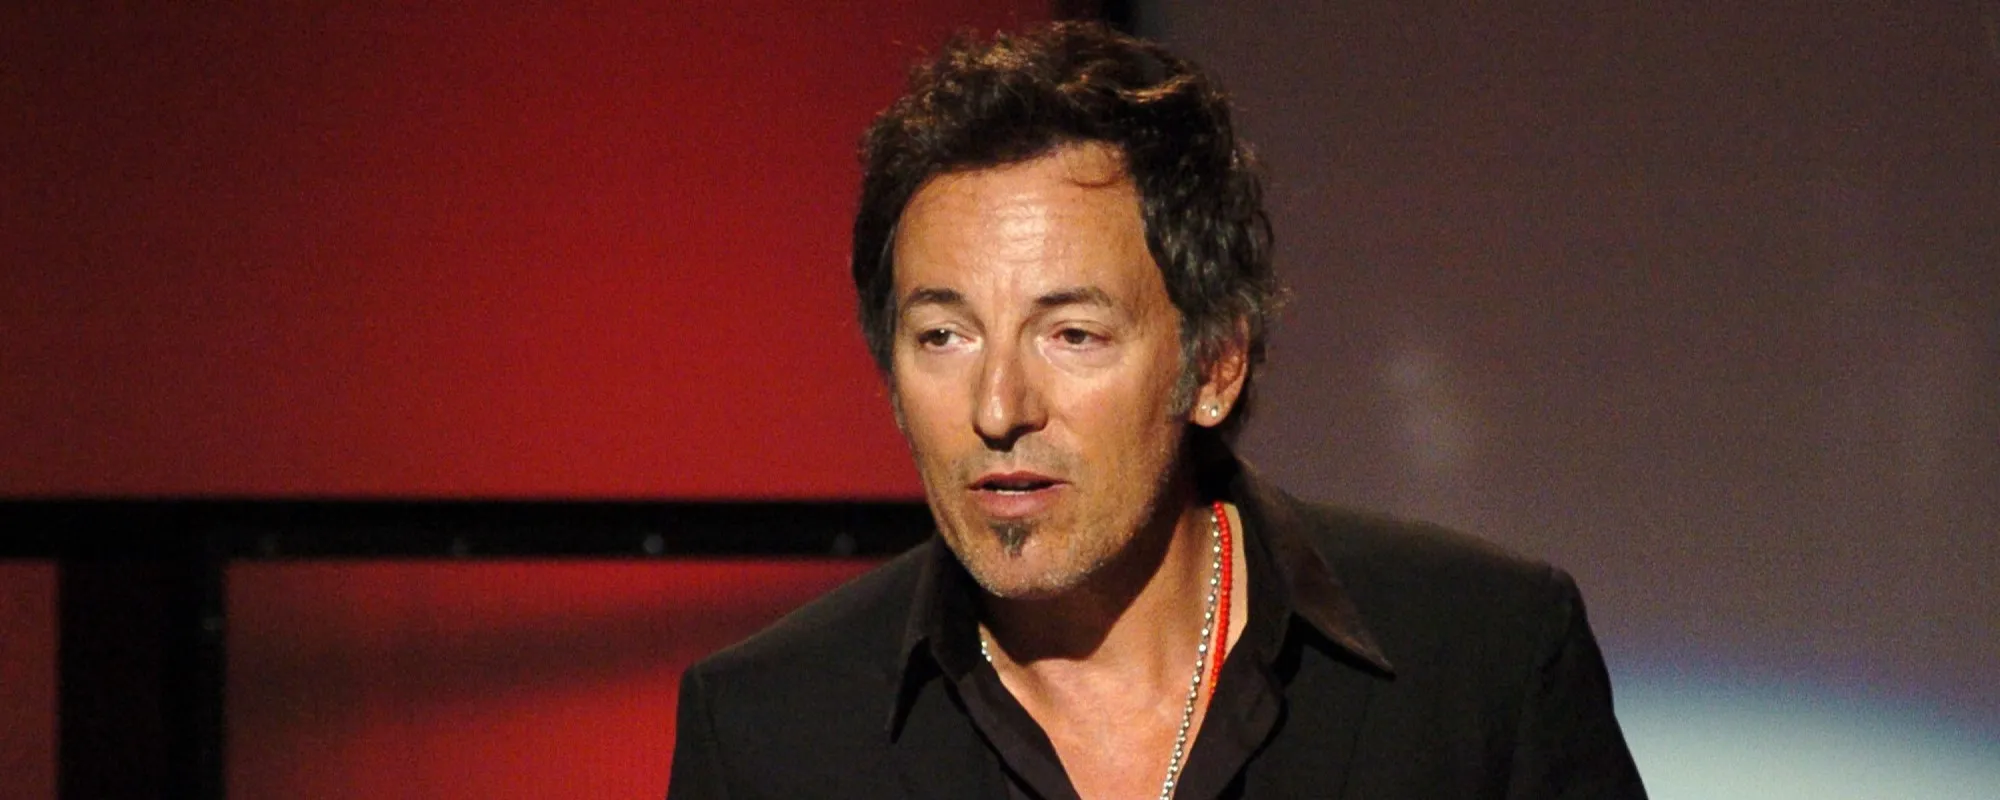 Remember When Bruce Springsteen Was Inducted into the Rock & Roll Hall of Fame by U2’s Bono?